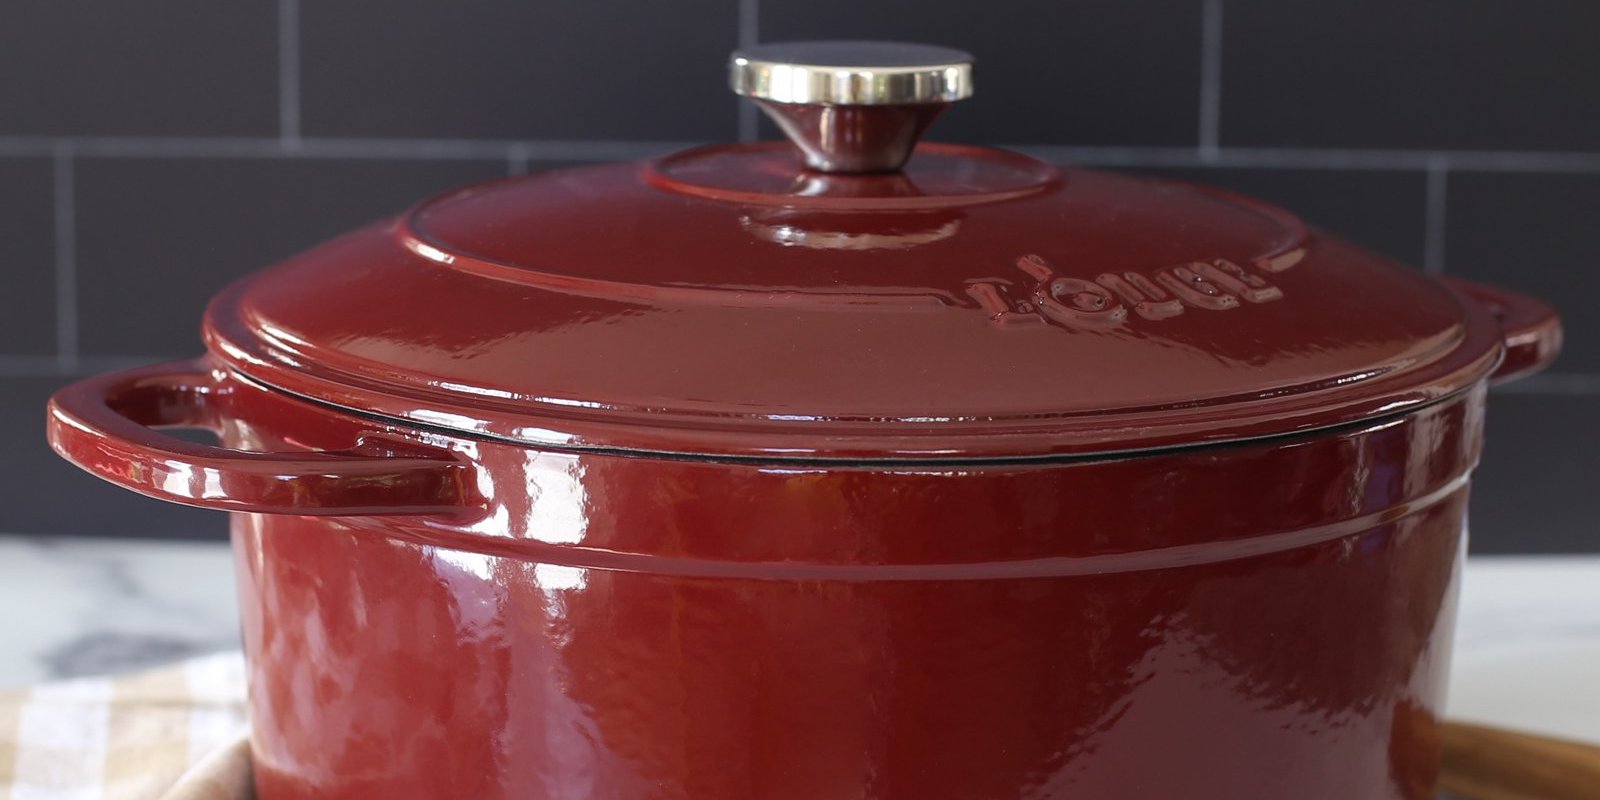 Prime Day Lodge Dutch Oven October 2022